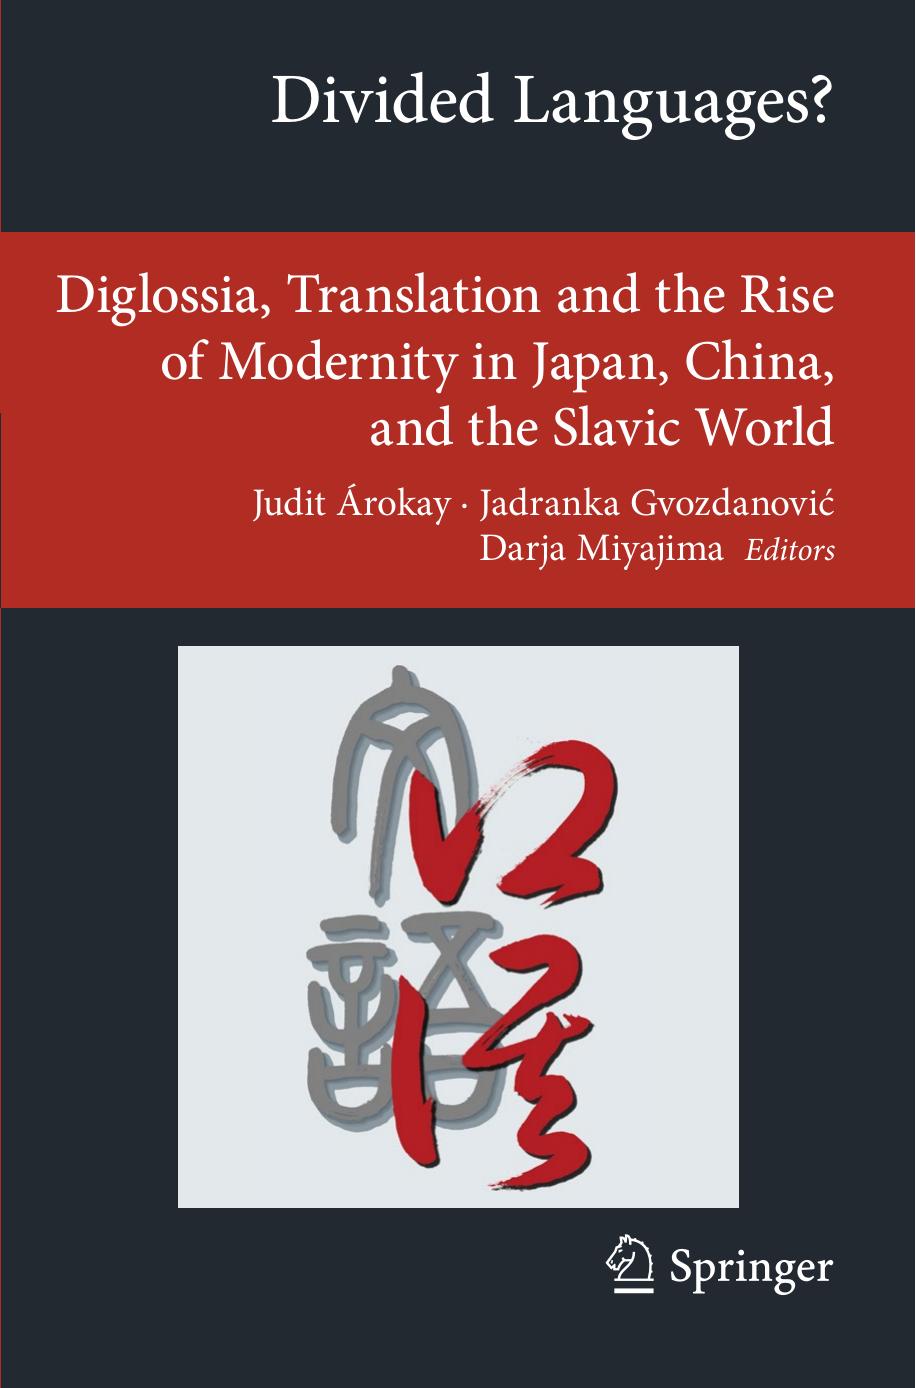 Divided Languages?: Diglossia, Translation and the Rise of Modernity in Japan, China, and the Slavic World